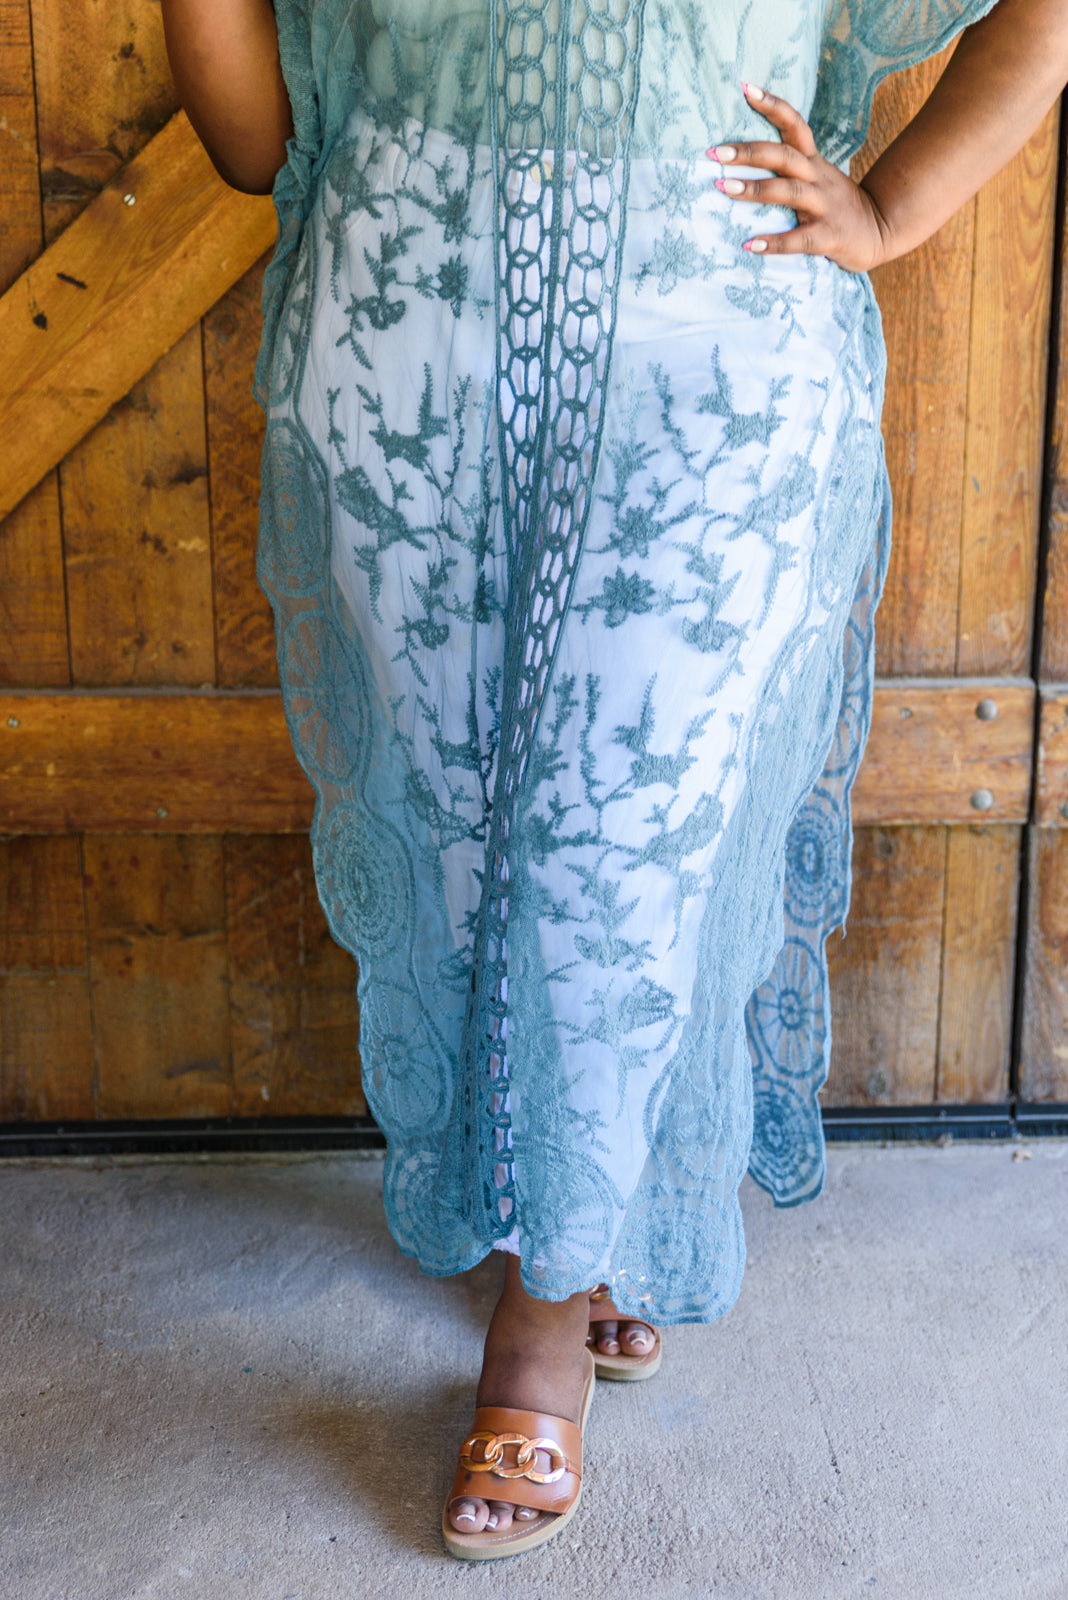 Admiring Athens Cover-Up In Teal